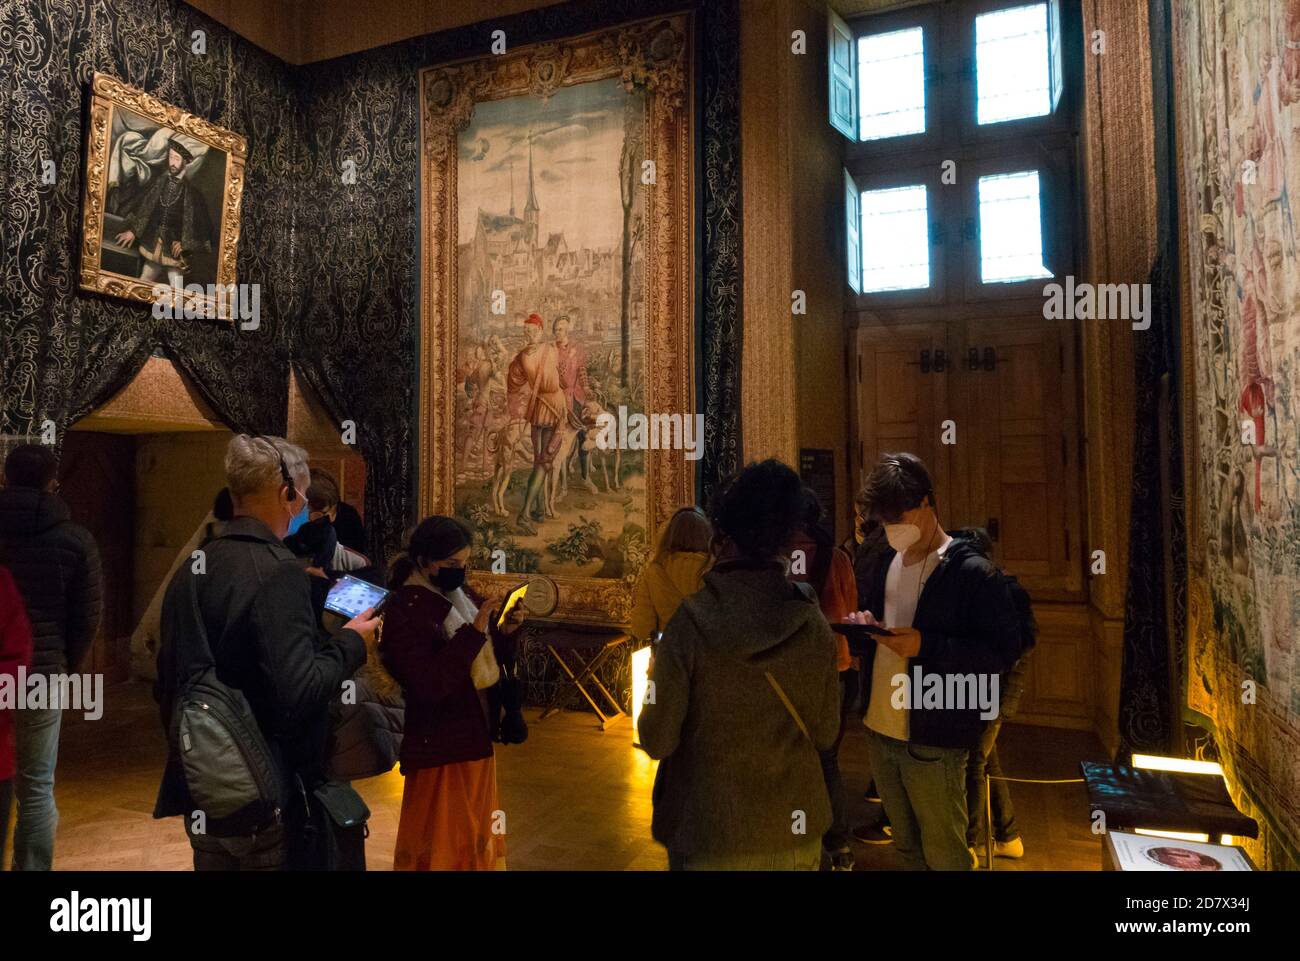 France, Loir-et-Cher (41), Chambord (Unesco World Heritage), royal castle from Renaissance period, king's room, masked visitors during the Covid19 per Stock Photo